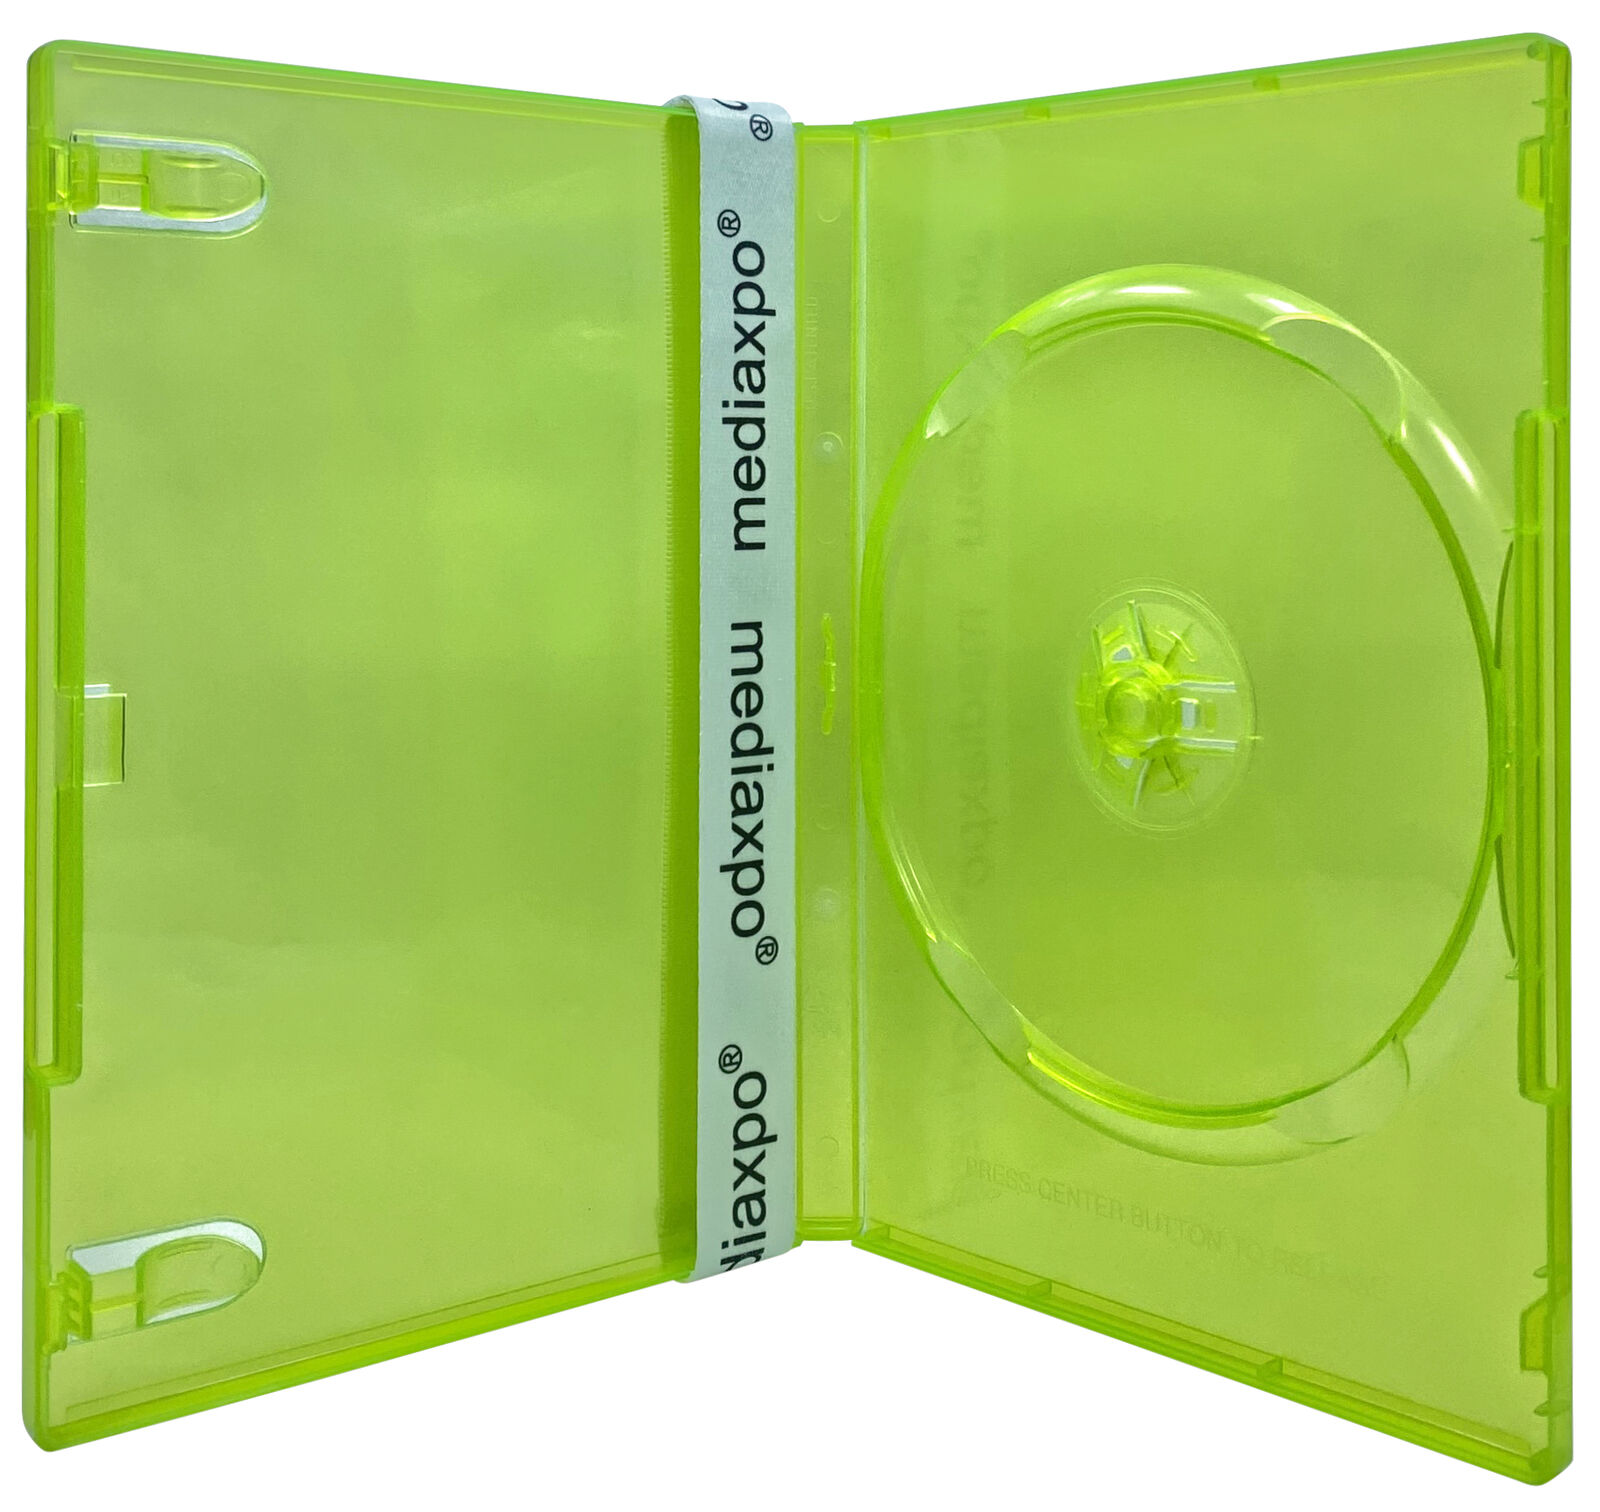 STANDARD Clear Green Color Single DVD Cases Lot